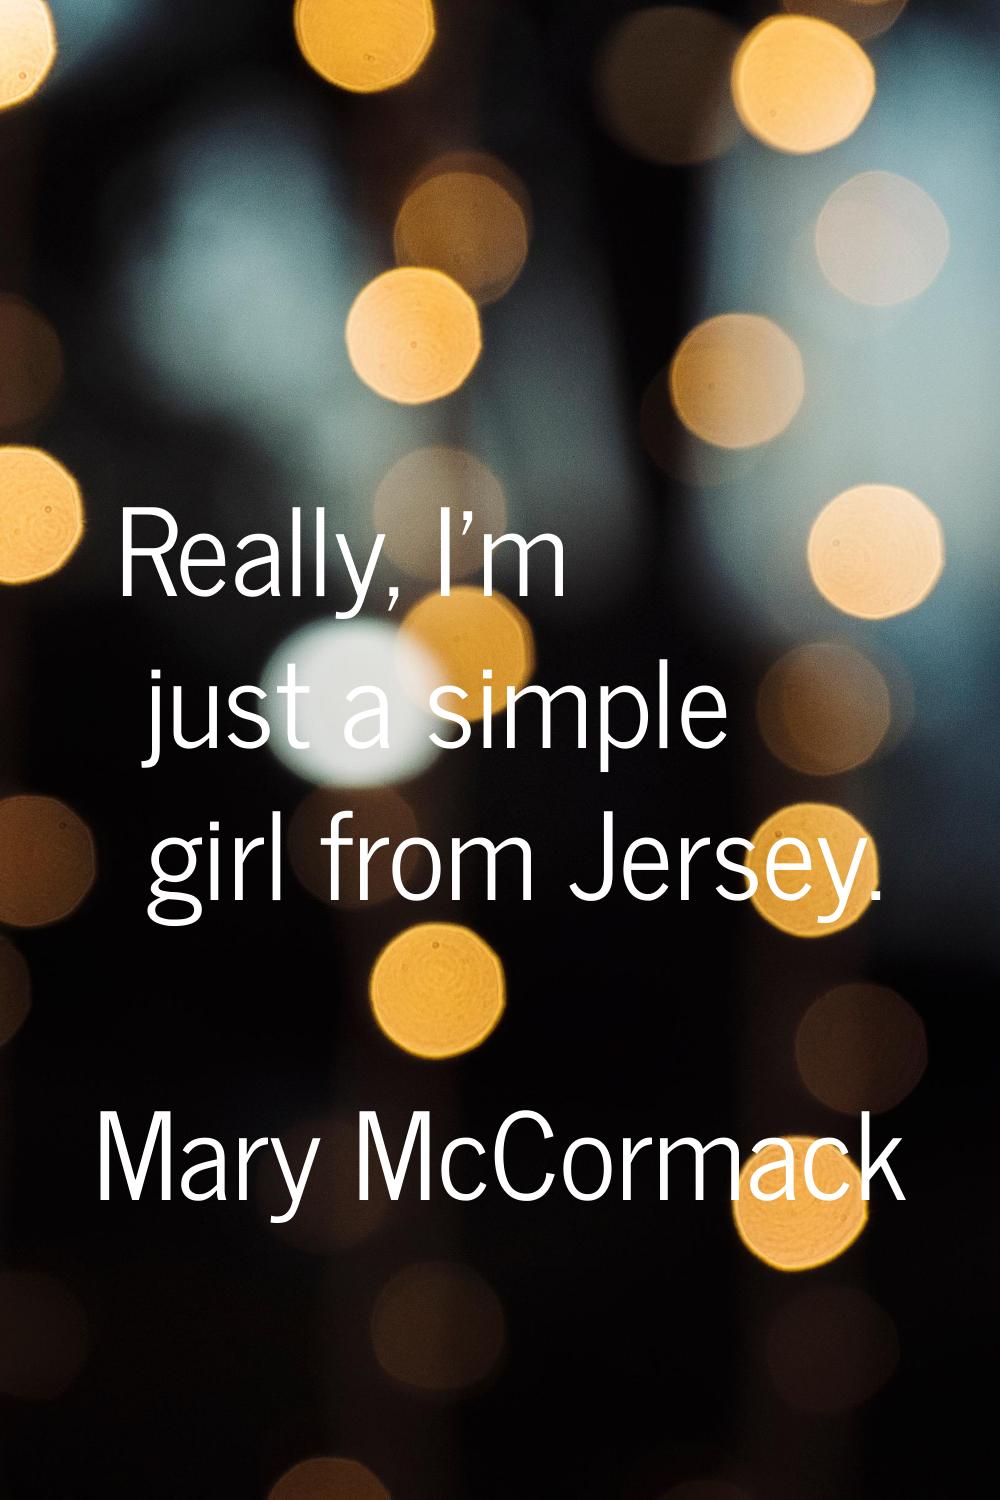 Really, I'm just a simple girl from Jersey.